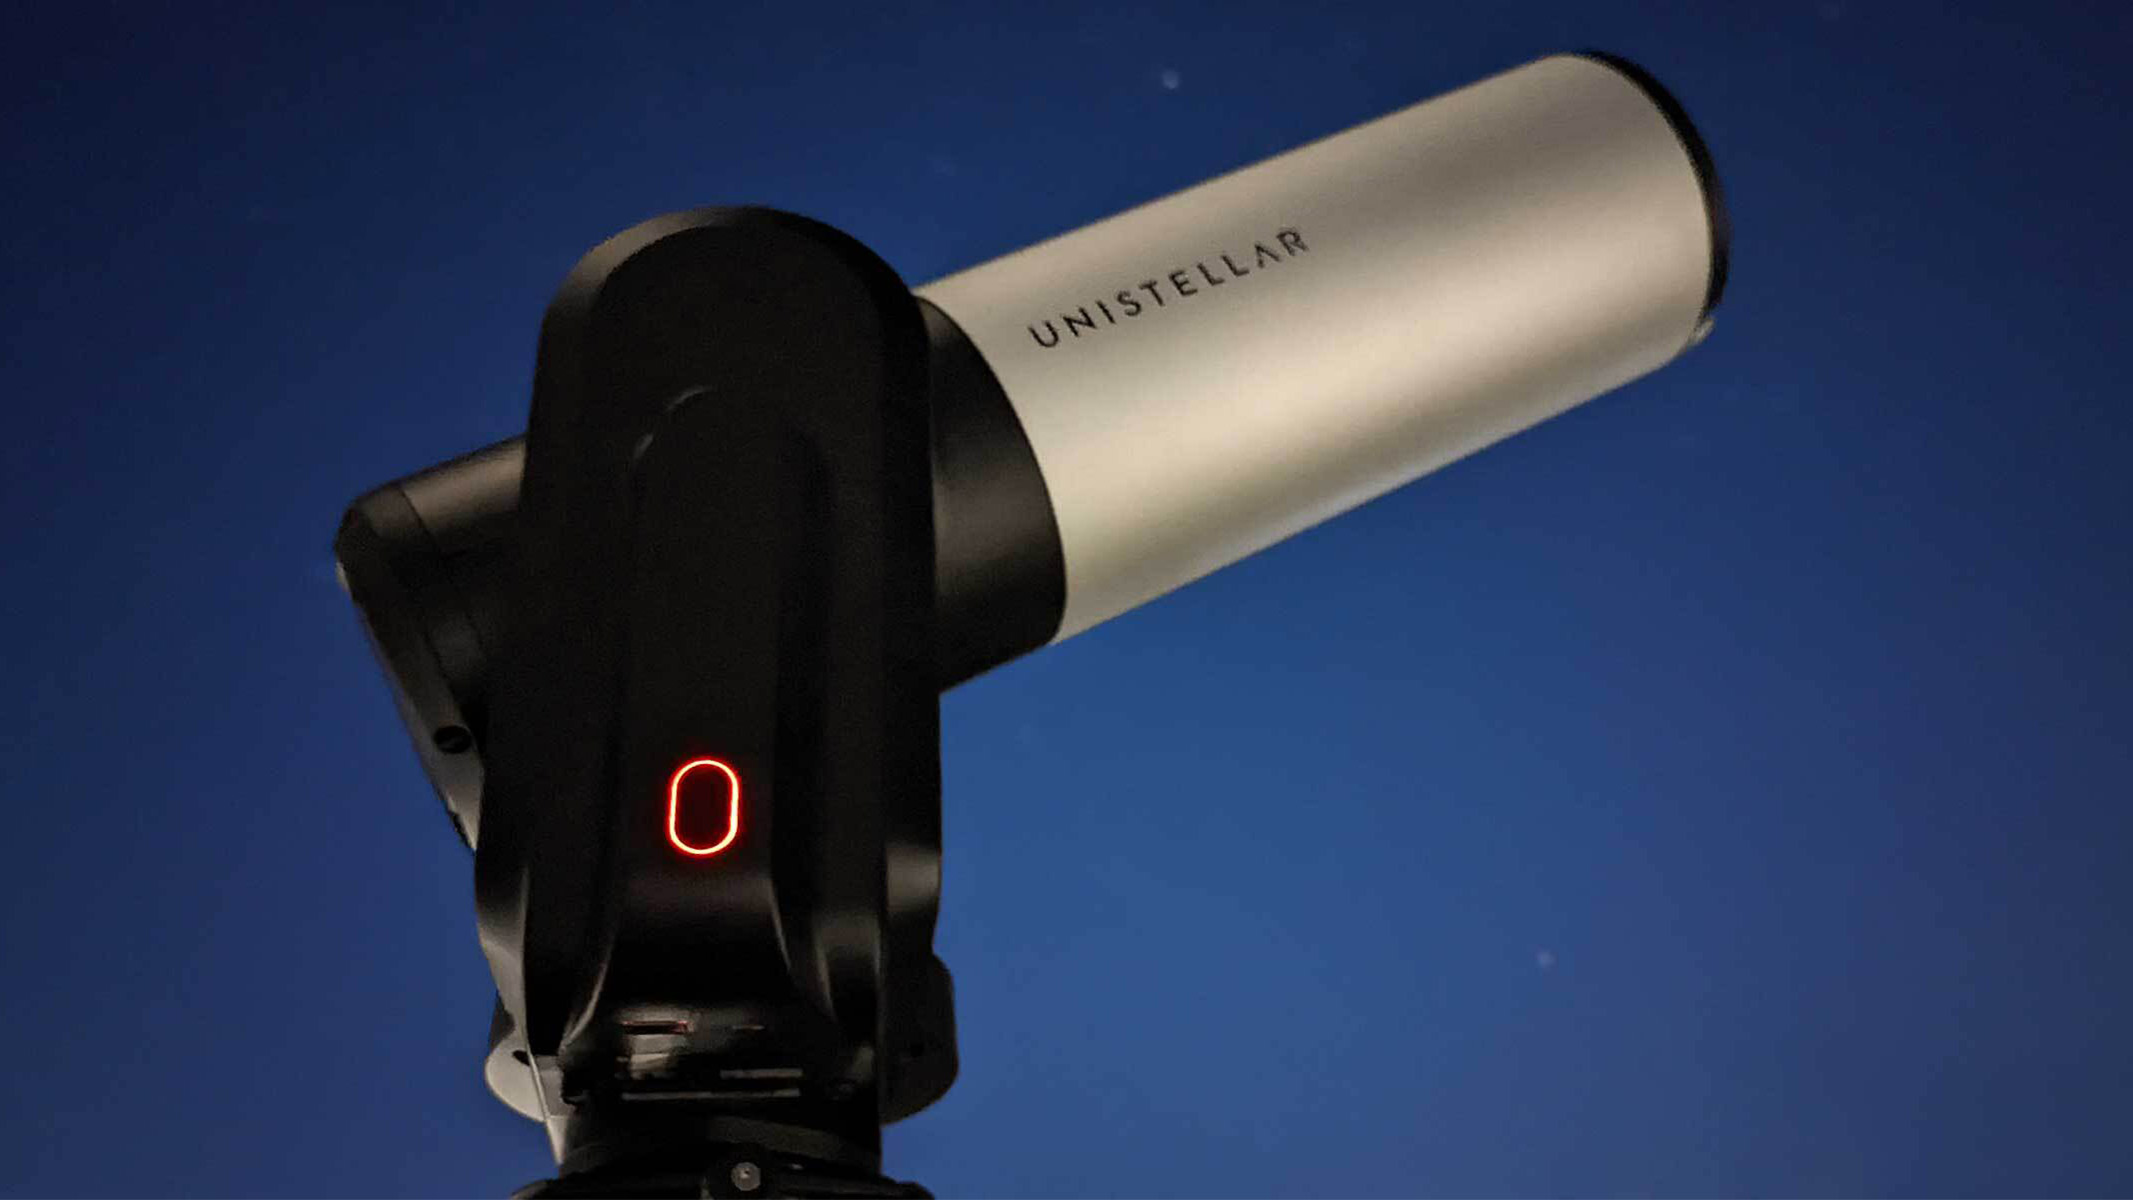 Save up to $900 on these festive Unistellar telescope deals